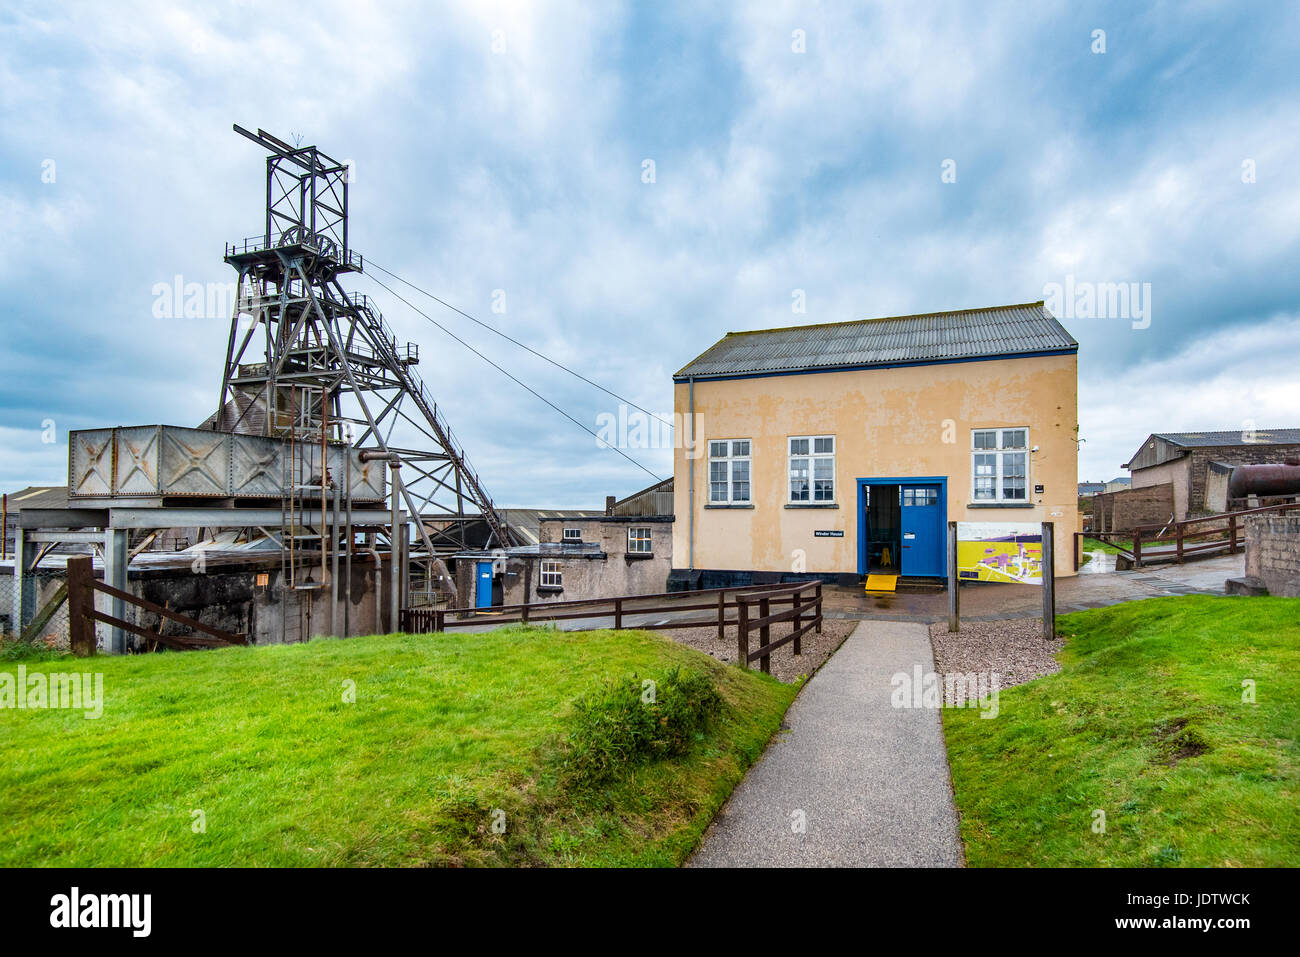 The Winder House and Headgear at Geevor Tin Mine, Cornwall, UK. Stock Photo